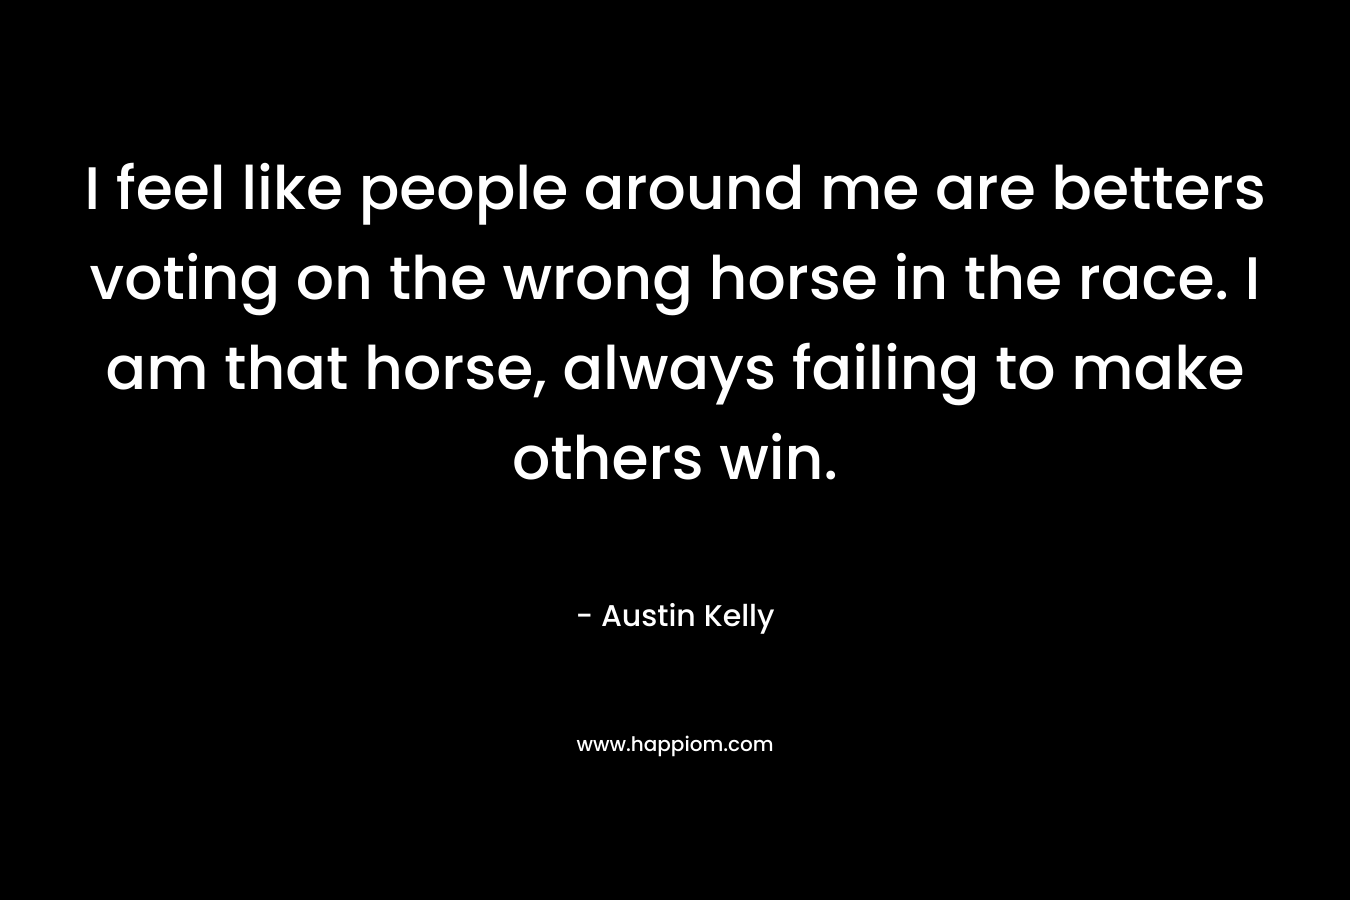 I feel like people around me are betters voting on the wrong horse in the race. I am that horse, always failing to make others win.